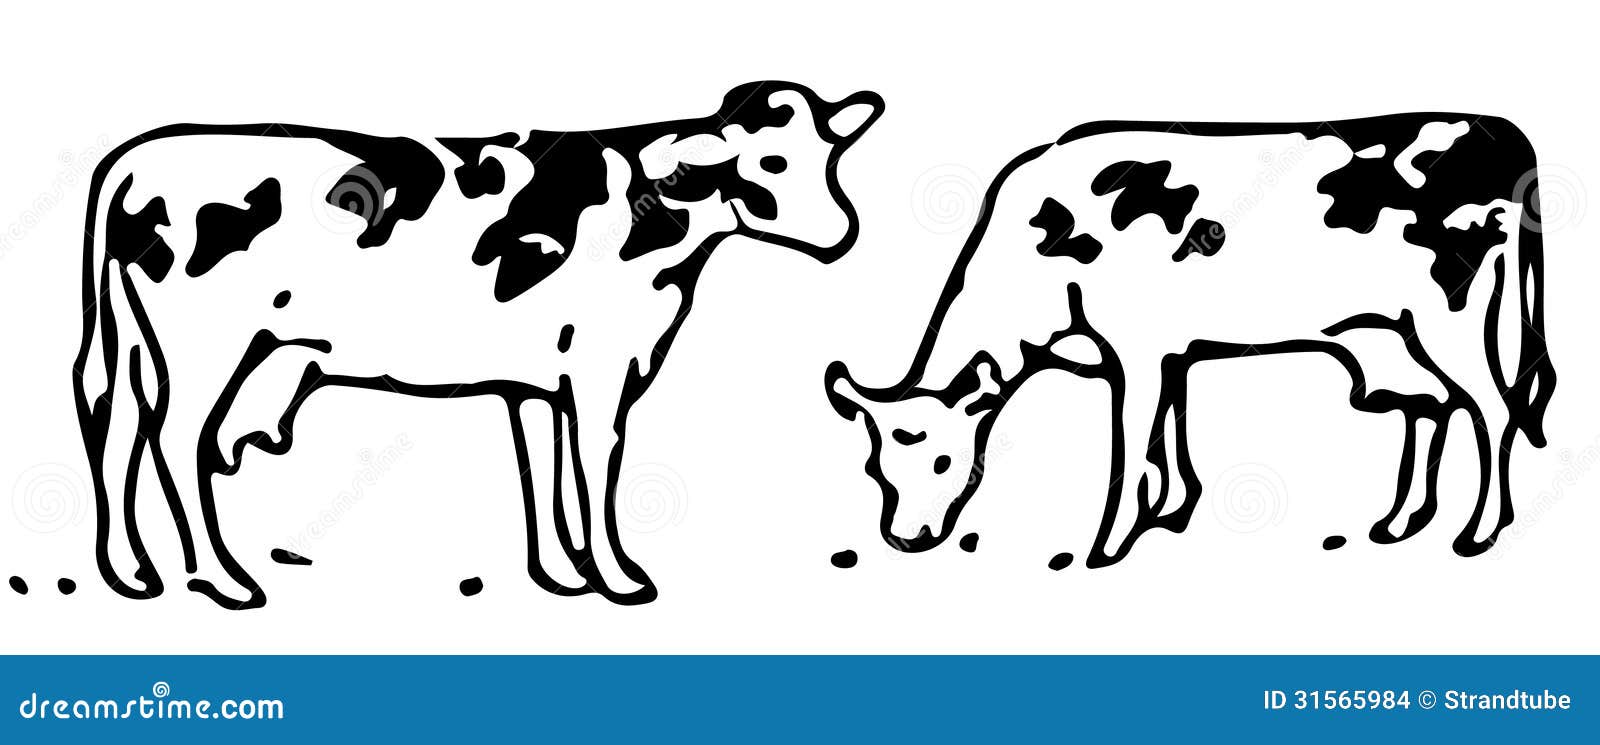 cow grazing clipart - photo #49